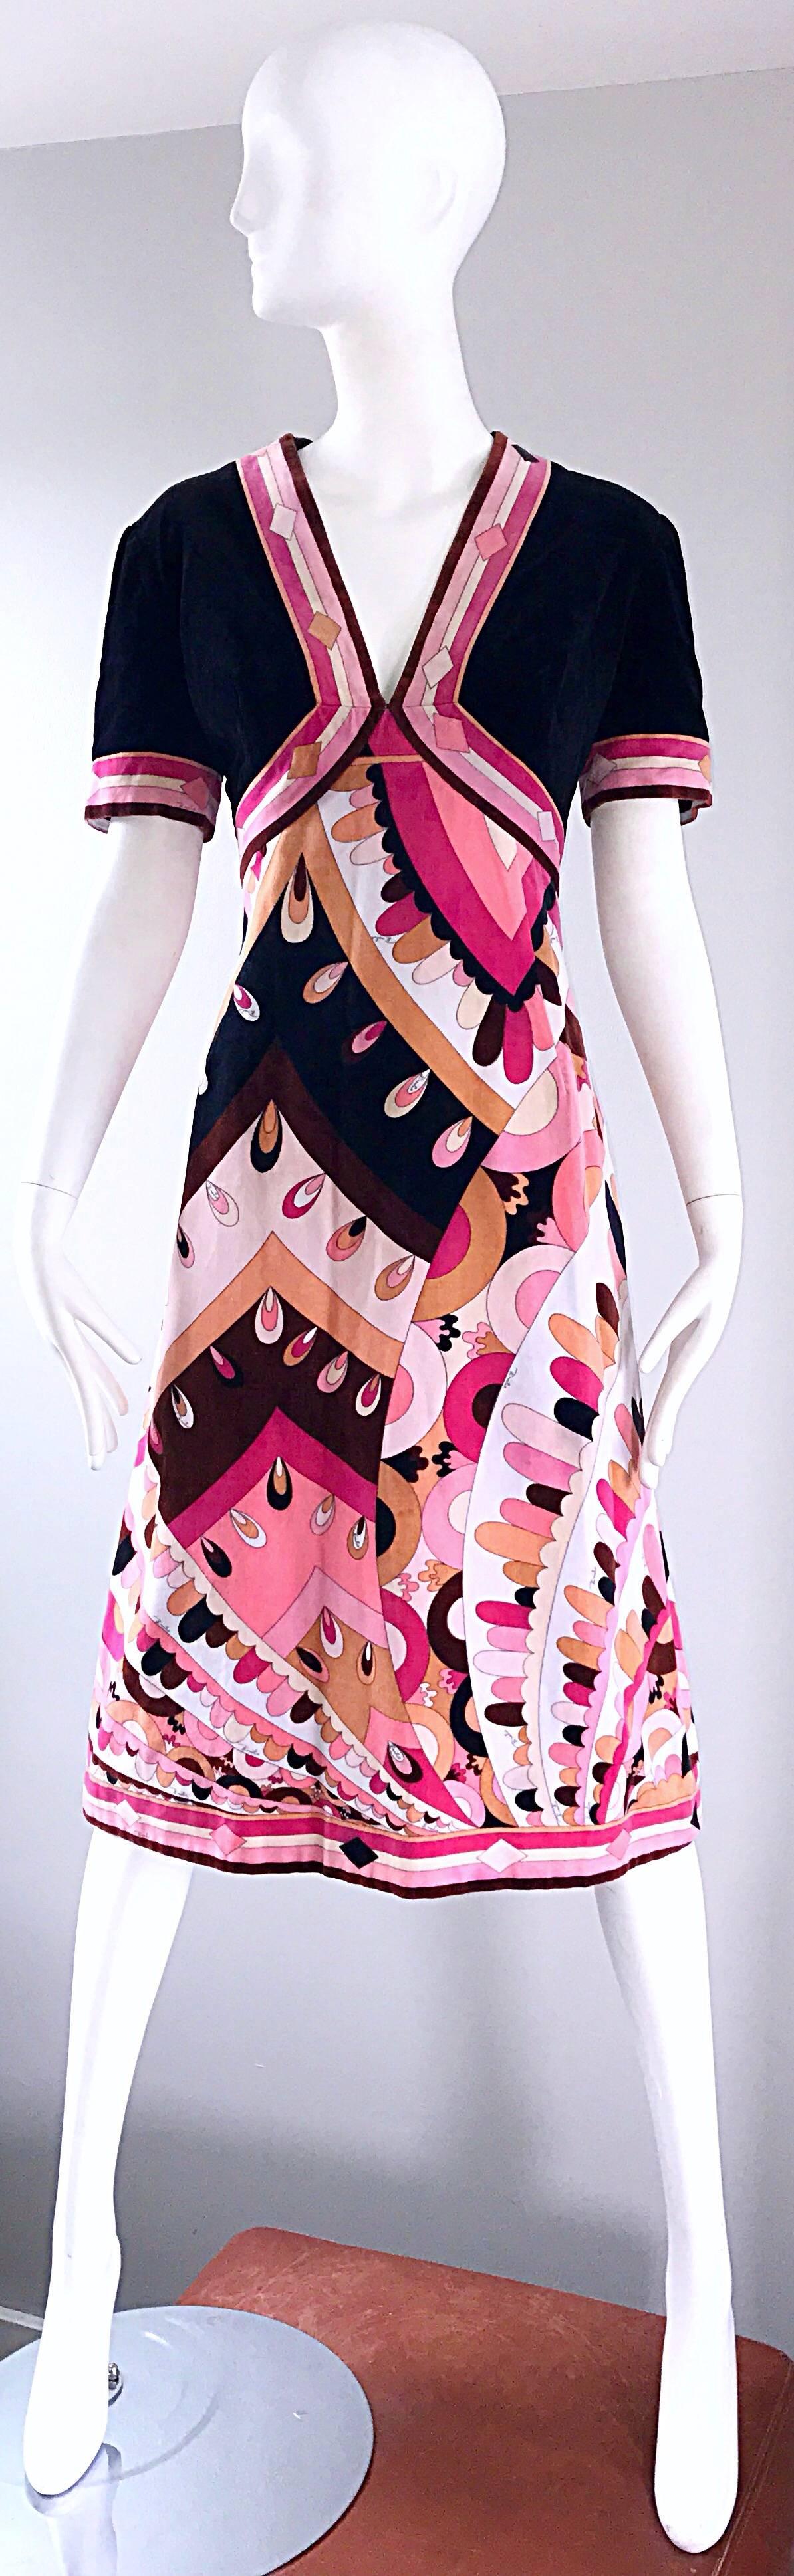 Amazing and rare 1960s EMILIO PUCCI short sleeve velvet A-Line dress! Features the signature kaleidoscope print, with the Pucci signature sporadically throughout. Pucci velvet pieces are extremely rare to come by, and are considered highly